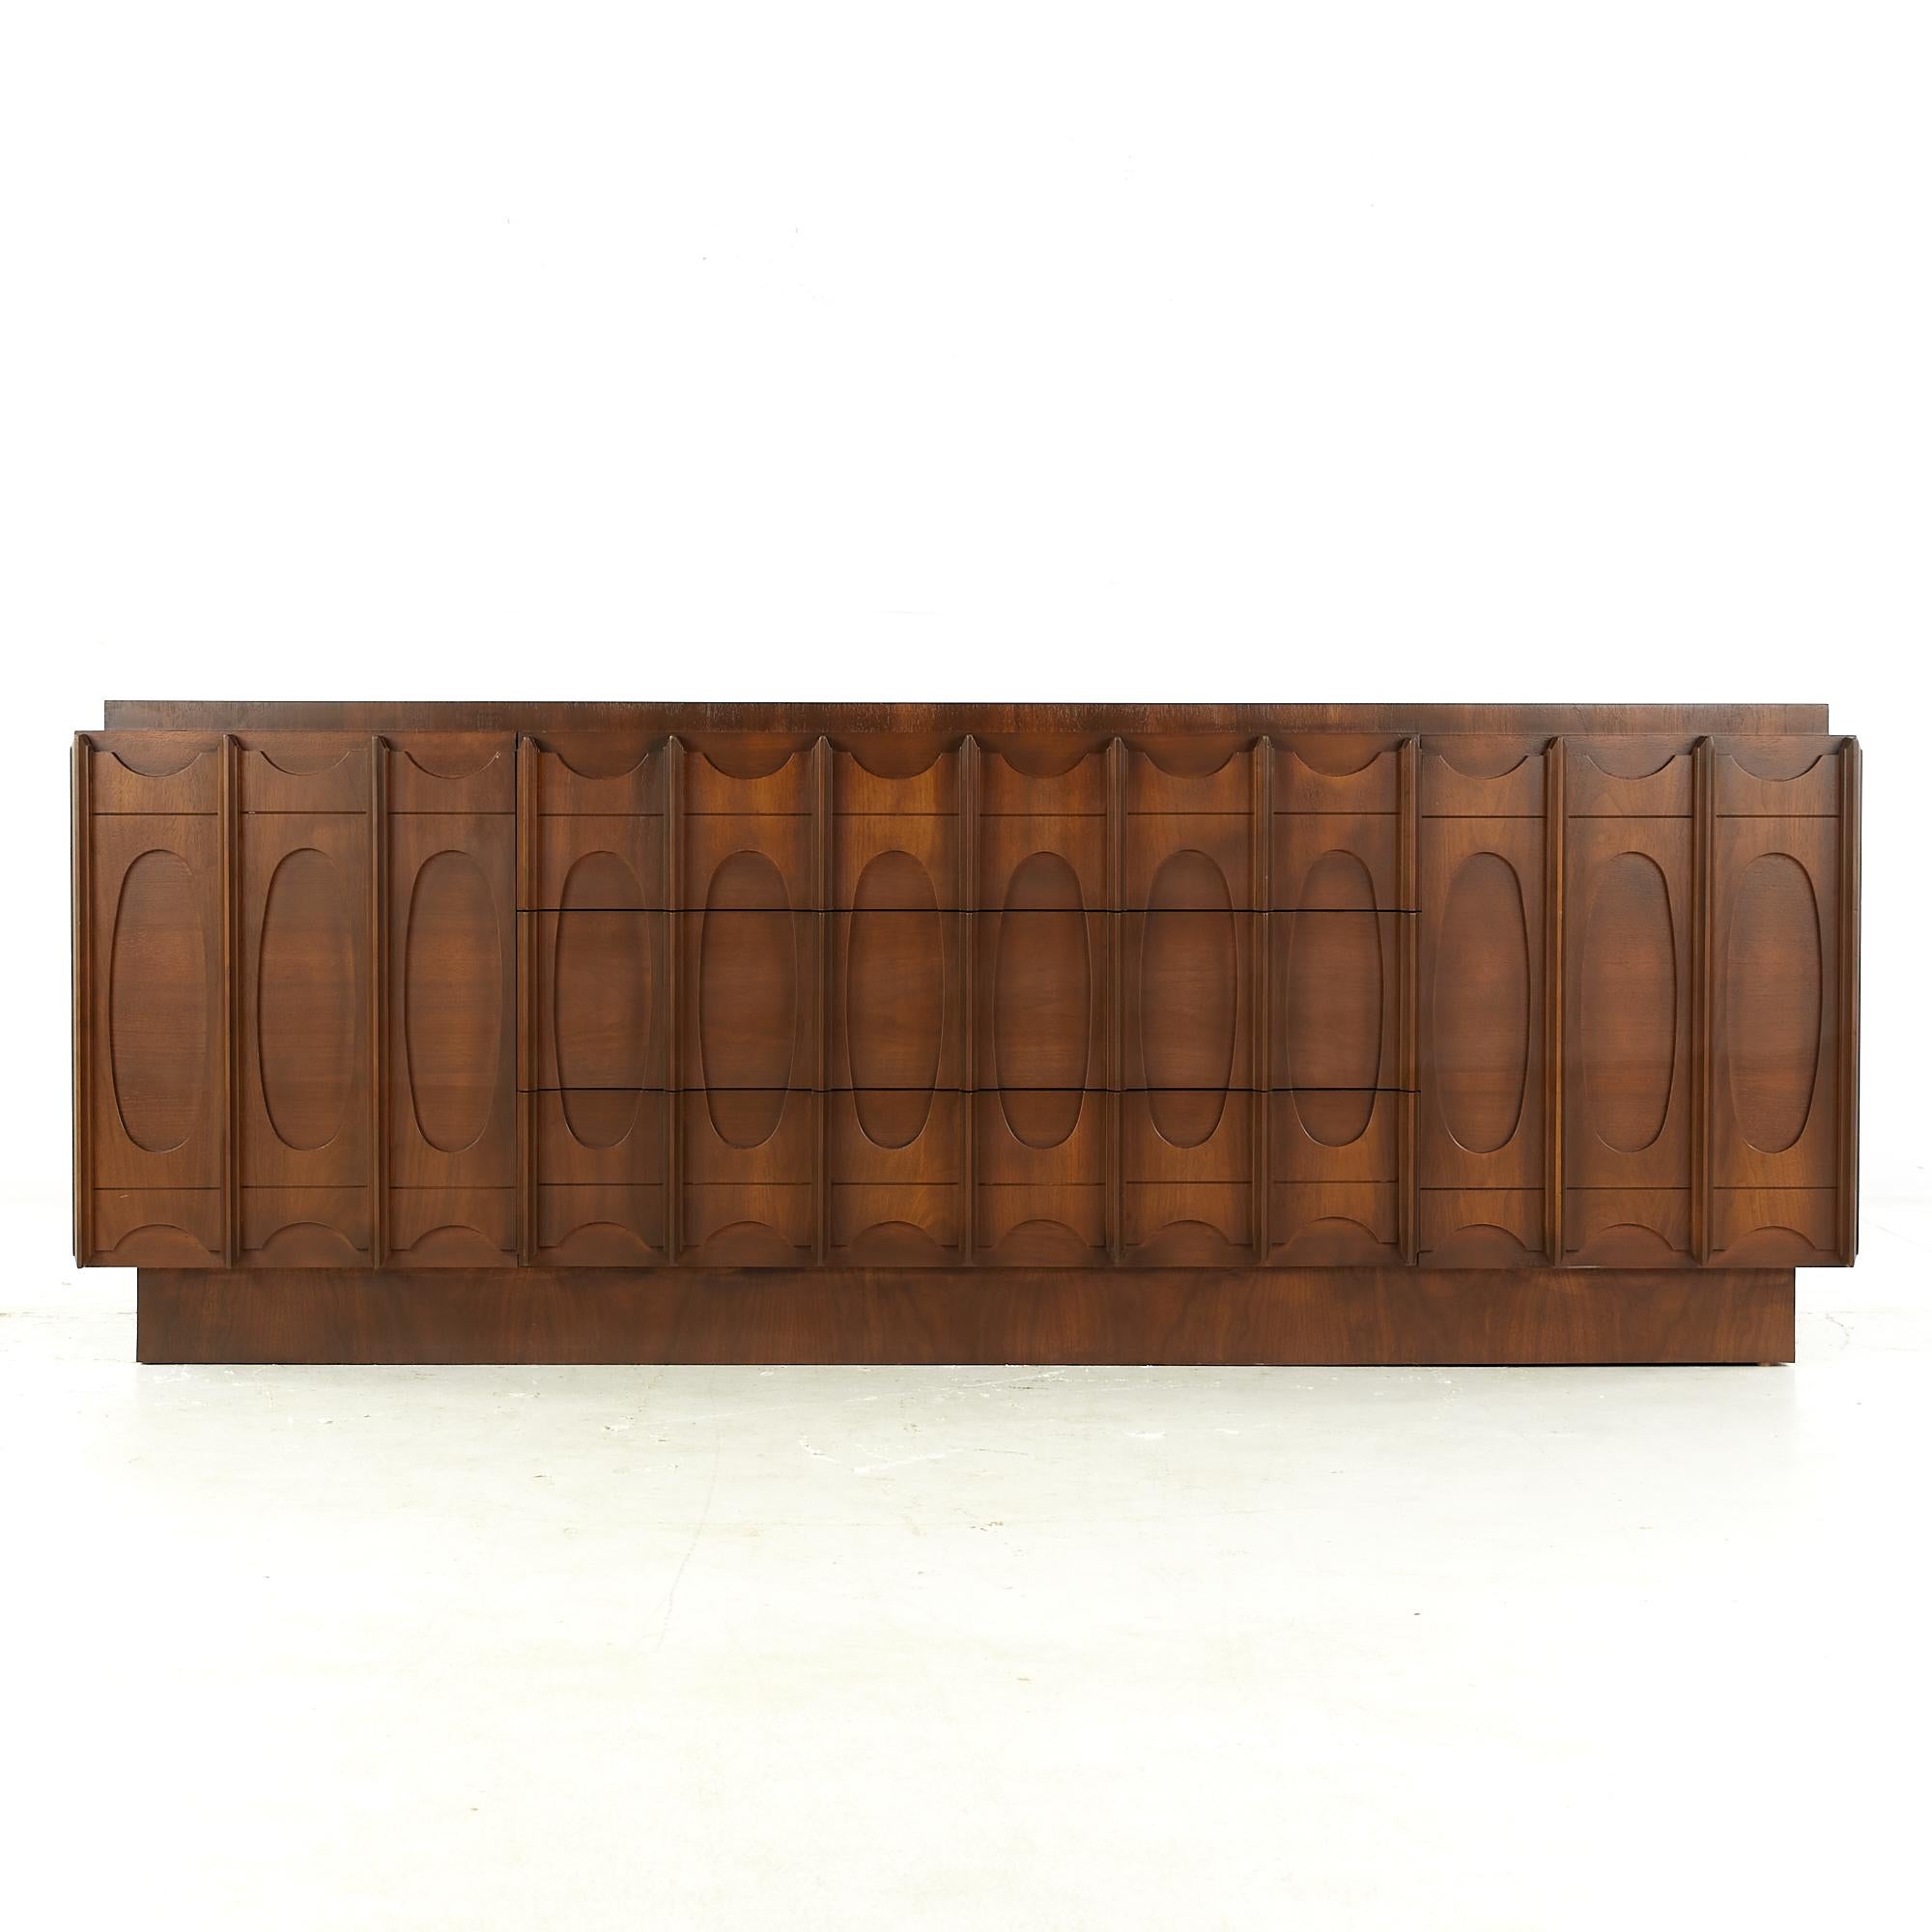 Tobago Brutalist midcentury walnut 9 drawer lowboy dresser.

Dresser measures: 80 wide x 21.5 deep x 30.5 inches high

All pieces of furniture can be had in what we call restored vintage condition. That means the piece is restored upon purchase